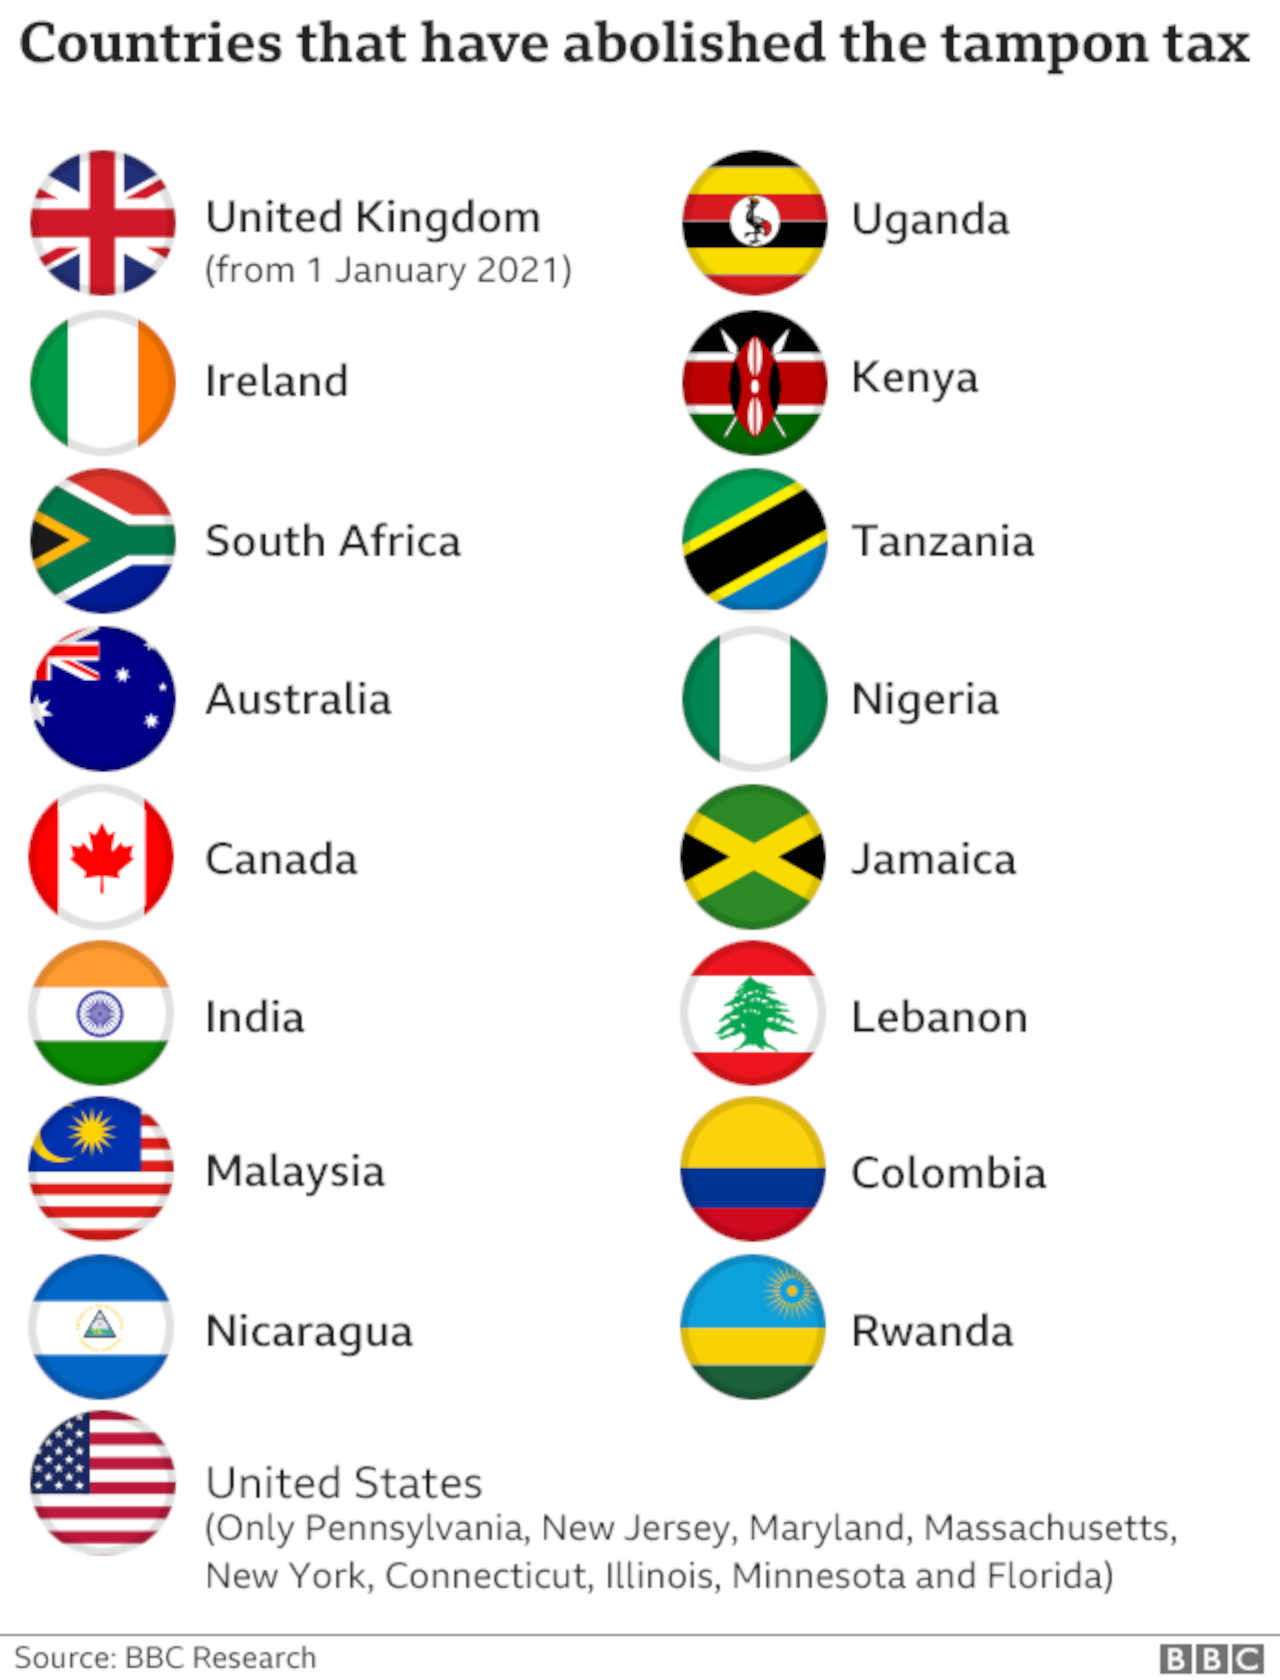 Graphic showing which countries have abolished the tampon tax